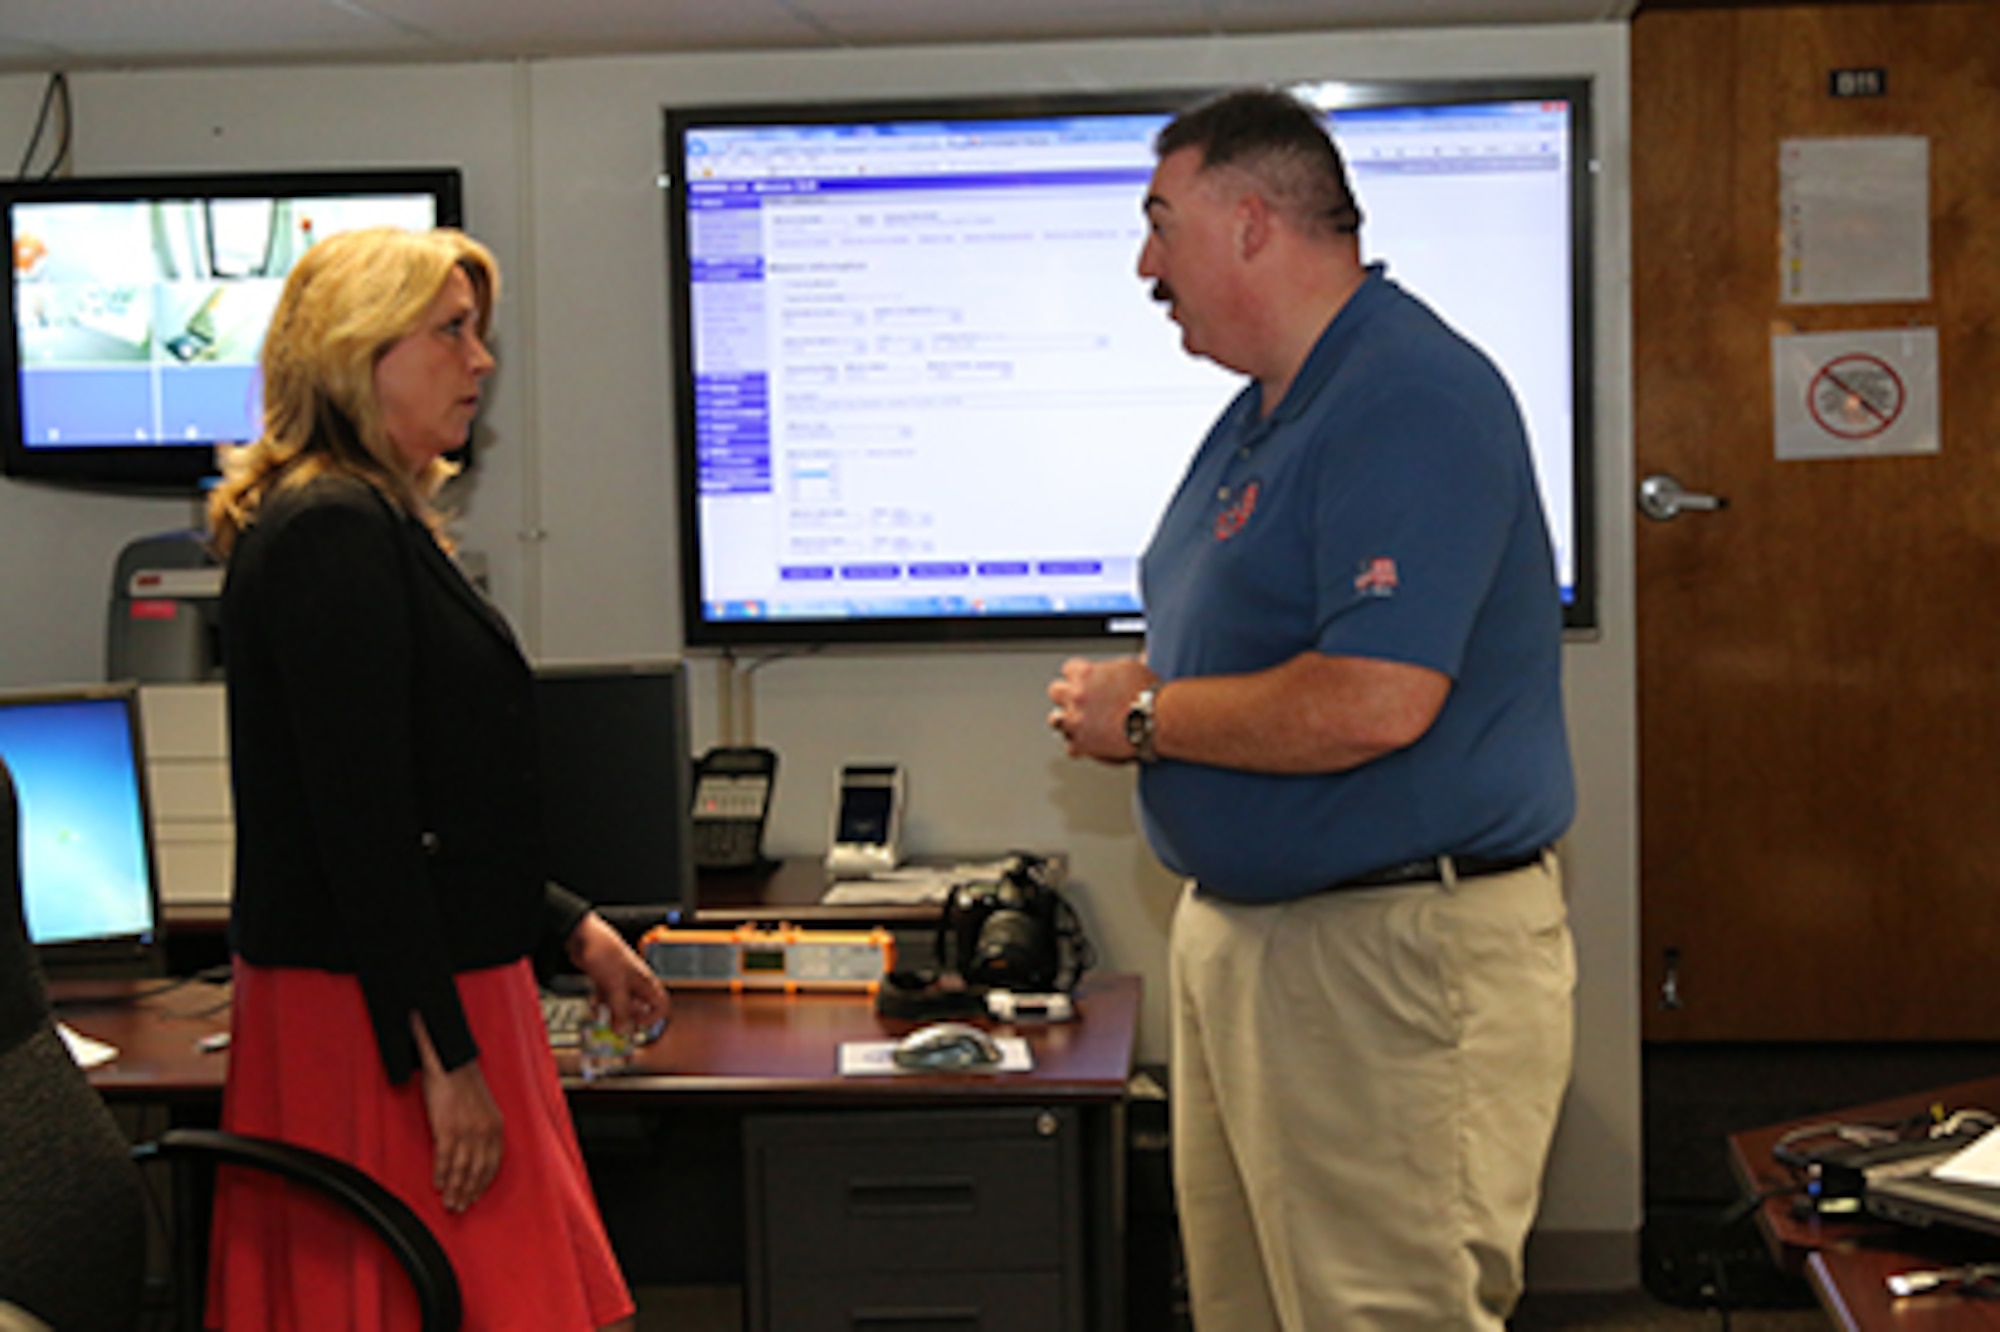 While visiting the Civil Air Patrol National Operations Center, Secretary of the Air Force Deborah Lee James was briefed by John Desmarais, CAP’s director of operations. Since 2002, the NOC has coordinated mission approval for CAP operations in support of federal, state and local authorities across the U.S. The NOC coordinates approval for thousands of missions annually with 1st Air Force, 11th Air Force and PACAF.